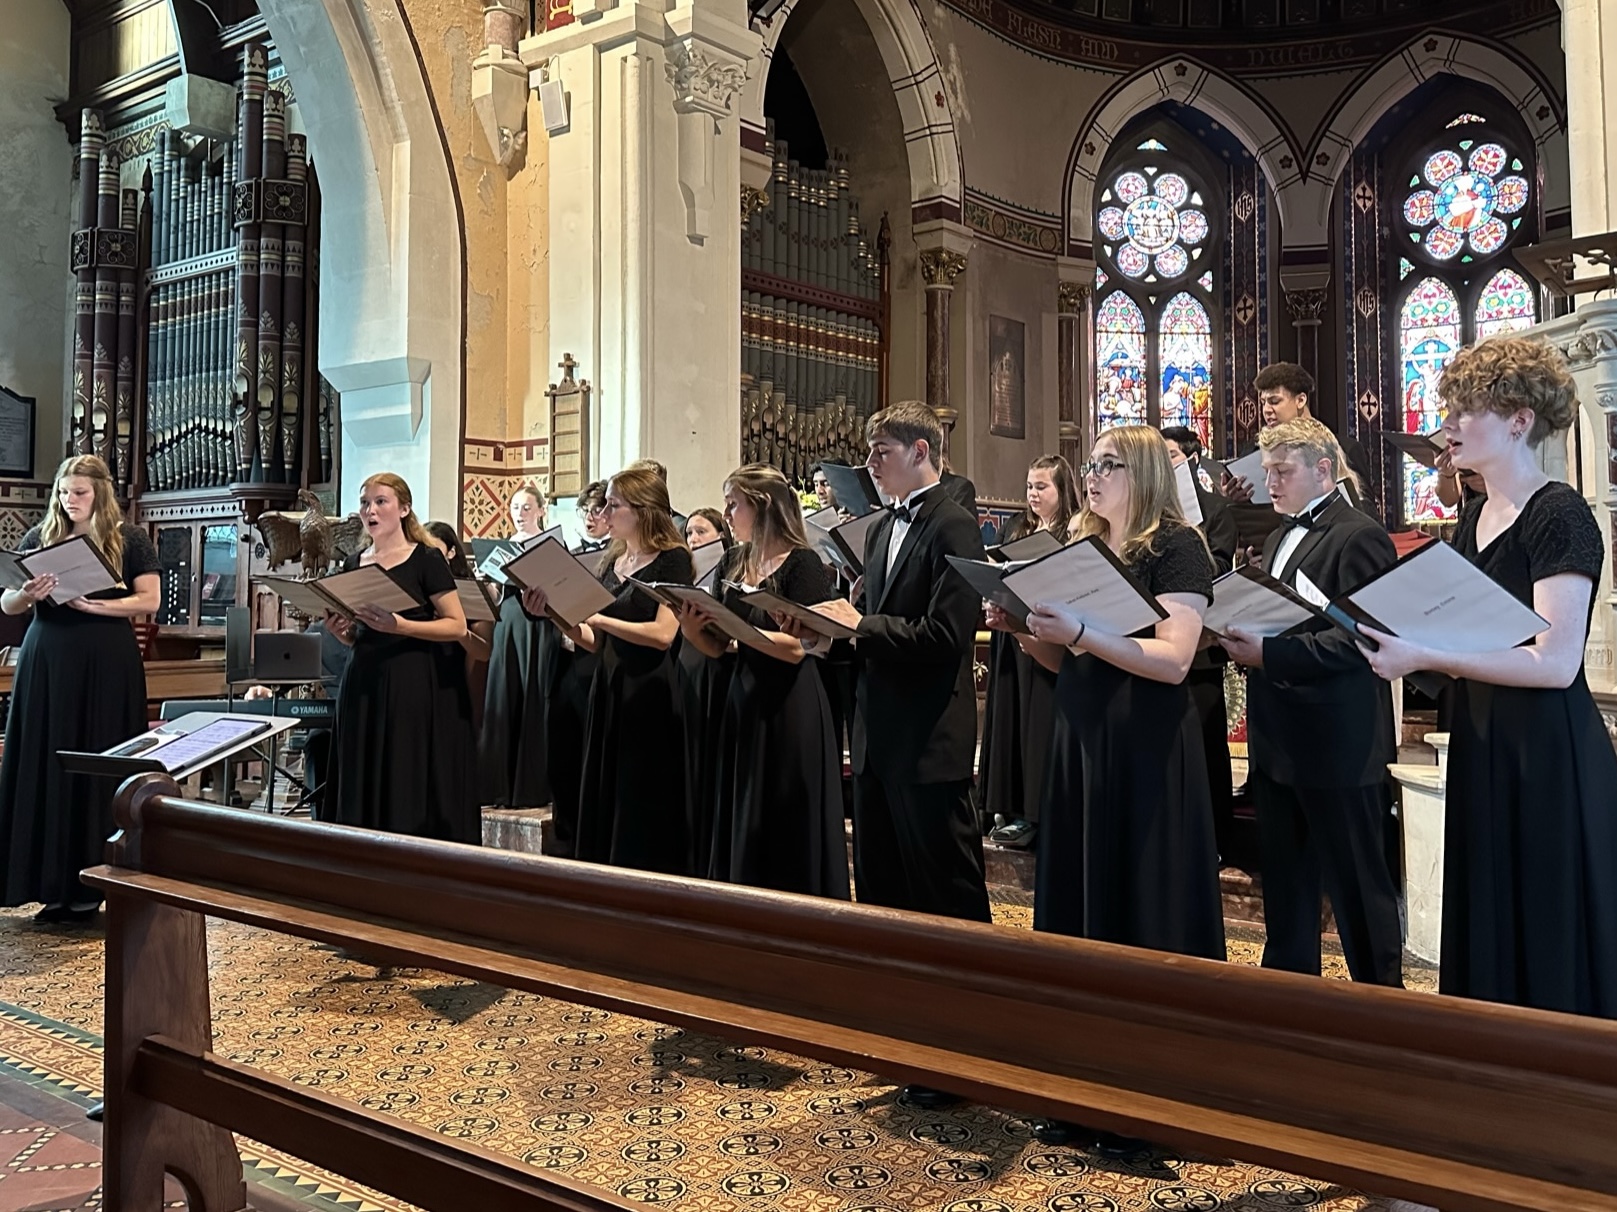 The Chamber Choir sings parts of the Rutters Requiem at St. Marys Church of Ireland in Killarney. Used with permission/Brian Suntken.